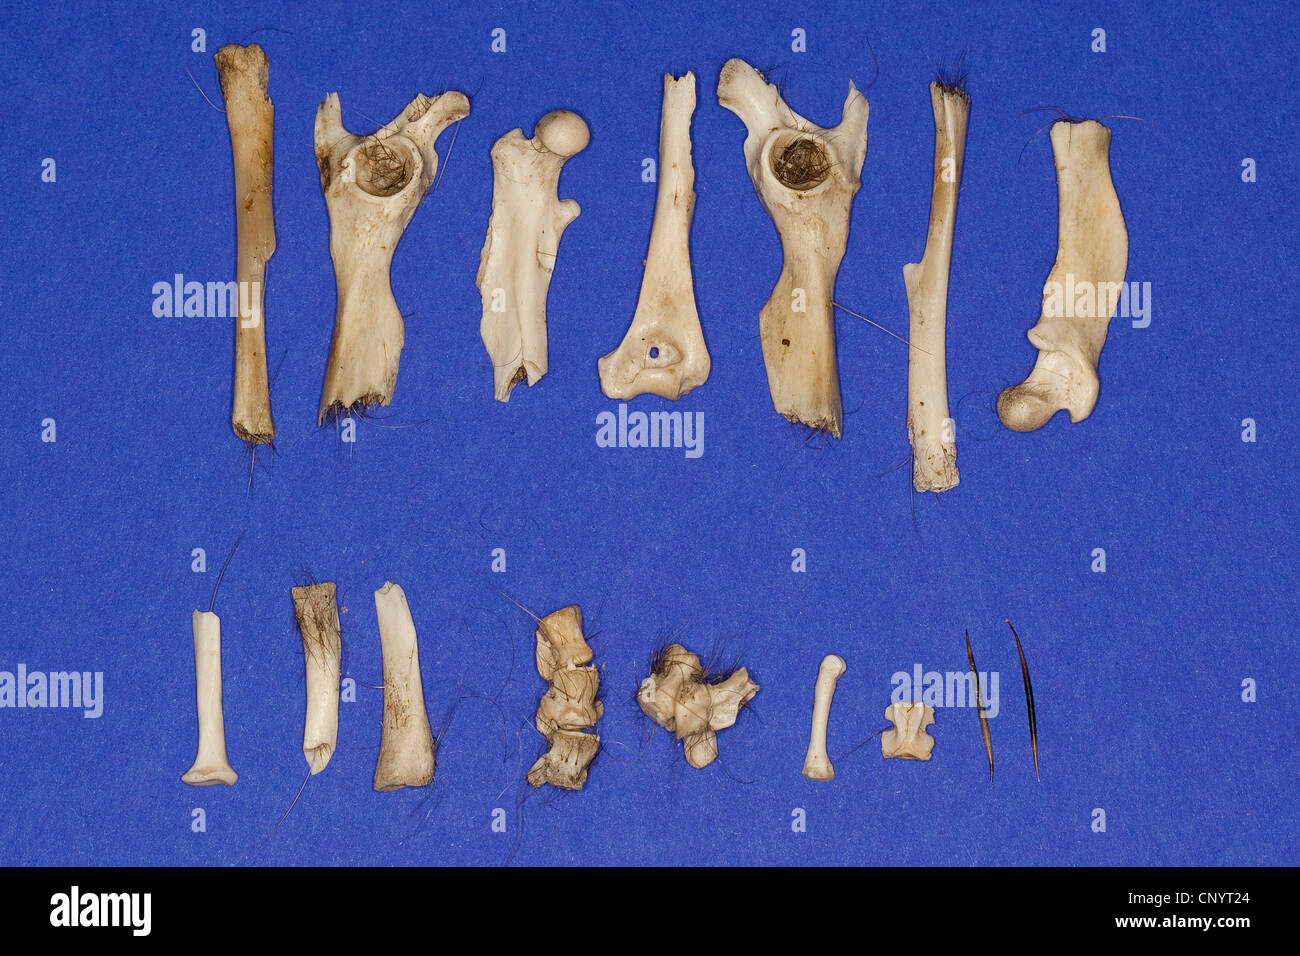 northern eagle owl (Bubo bubo), bones, spines and claws of a hedgehog - undigested food residue from a pellet Stock Photo